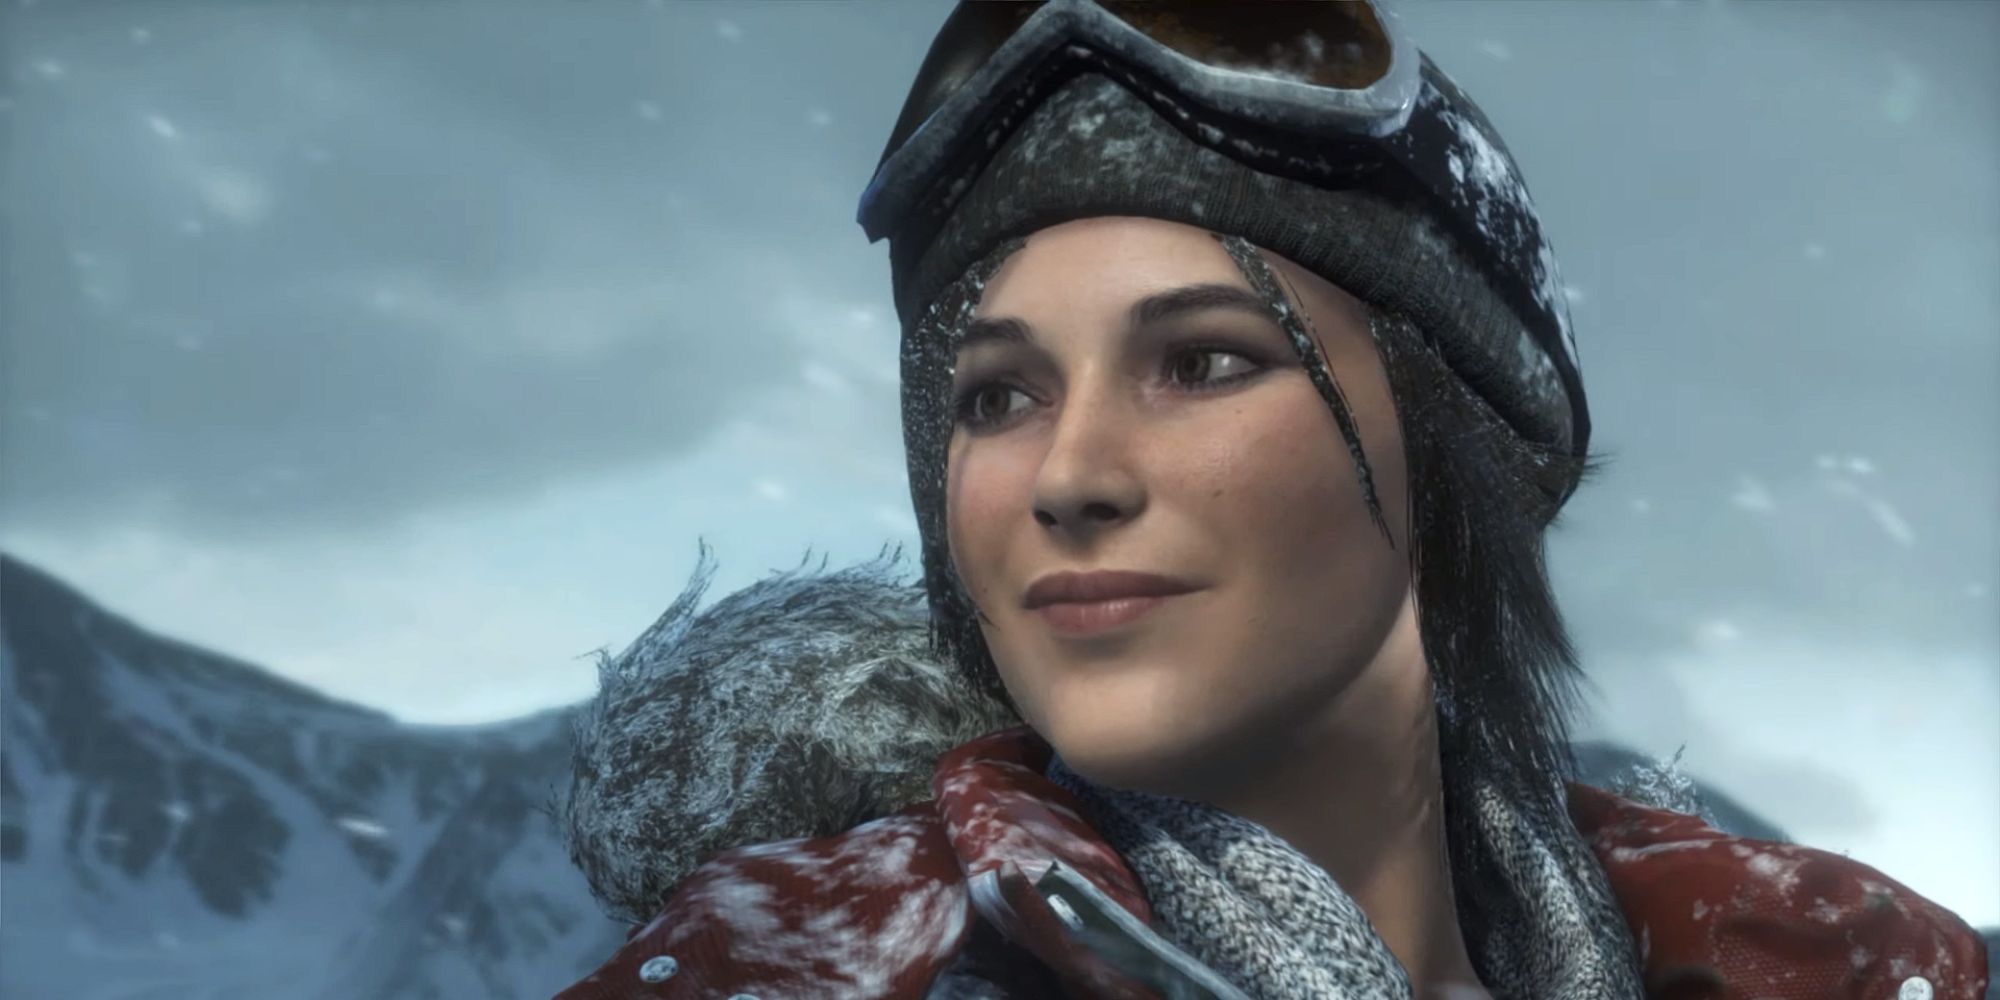 Lara Croft smiles as she stands on the summit of a snow mountain in winter gear